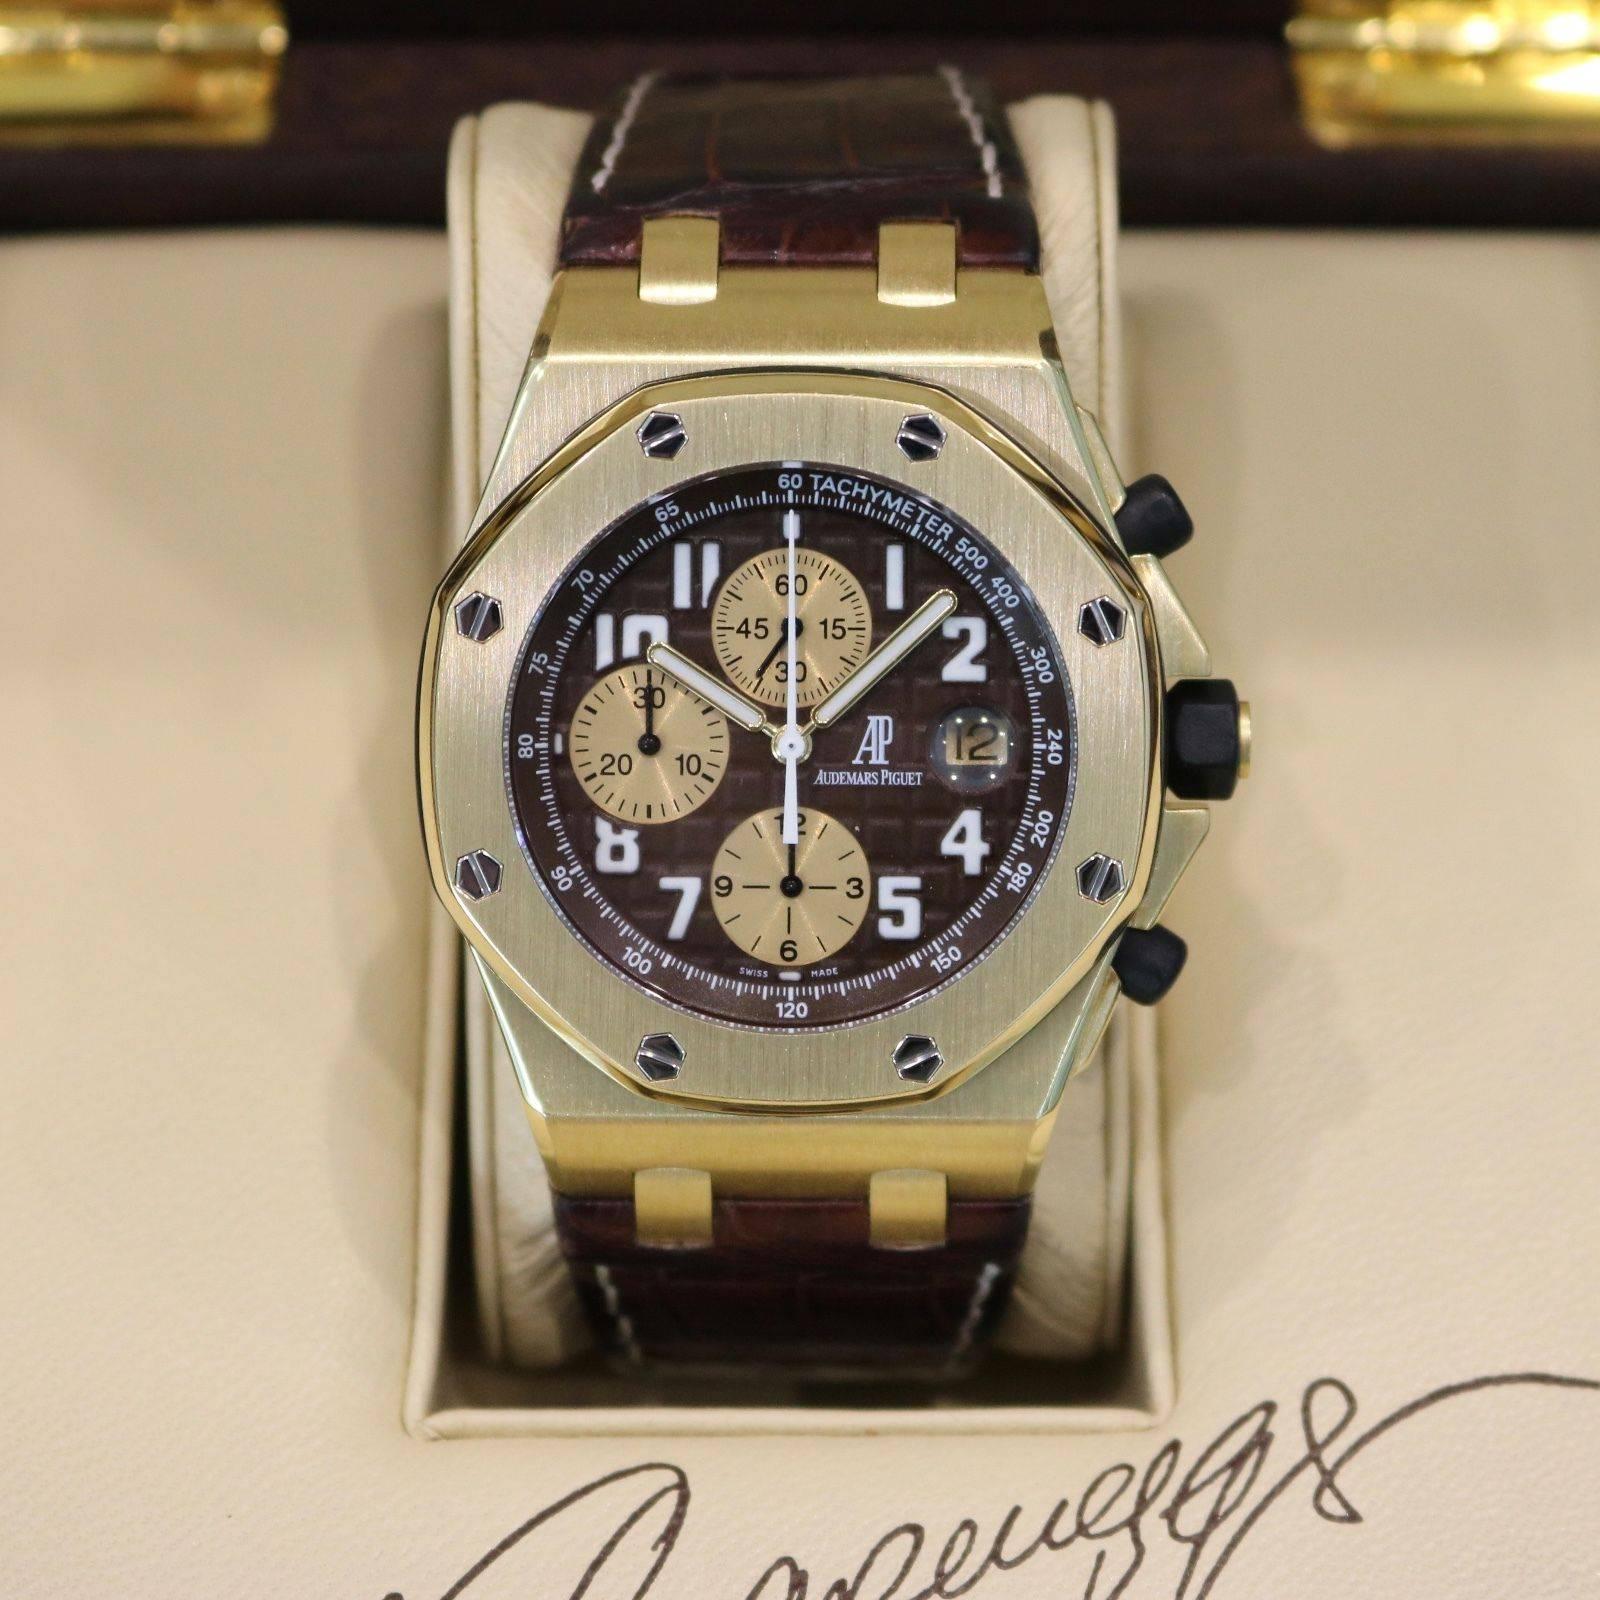 This limited edition model was made in 400 examples and released in 2003. Collectors Box is signed by Arnold too!

Brand Name: Audemars Piguet
Style Number: 26007BA.OO.D088.CR.01
Also Called: 26007BAOOD088CR01
Series: Royal Oak Offshore Arnold